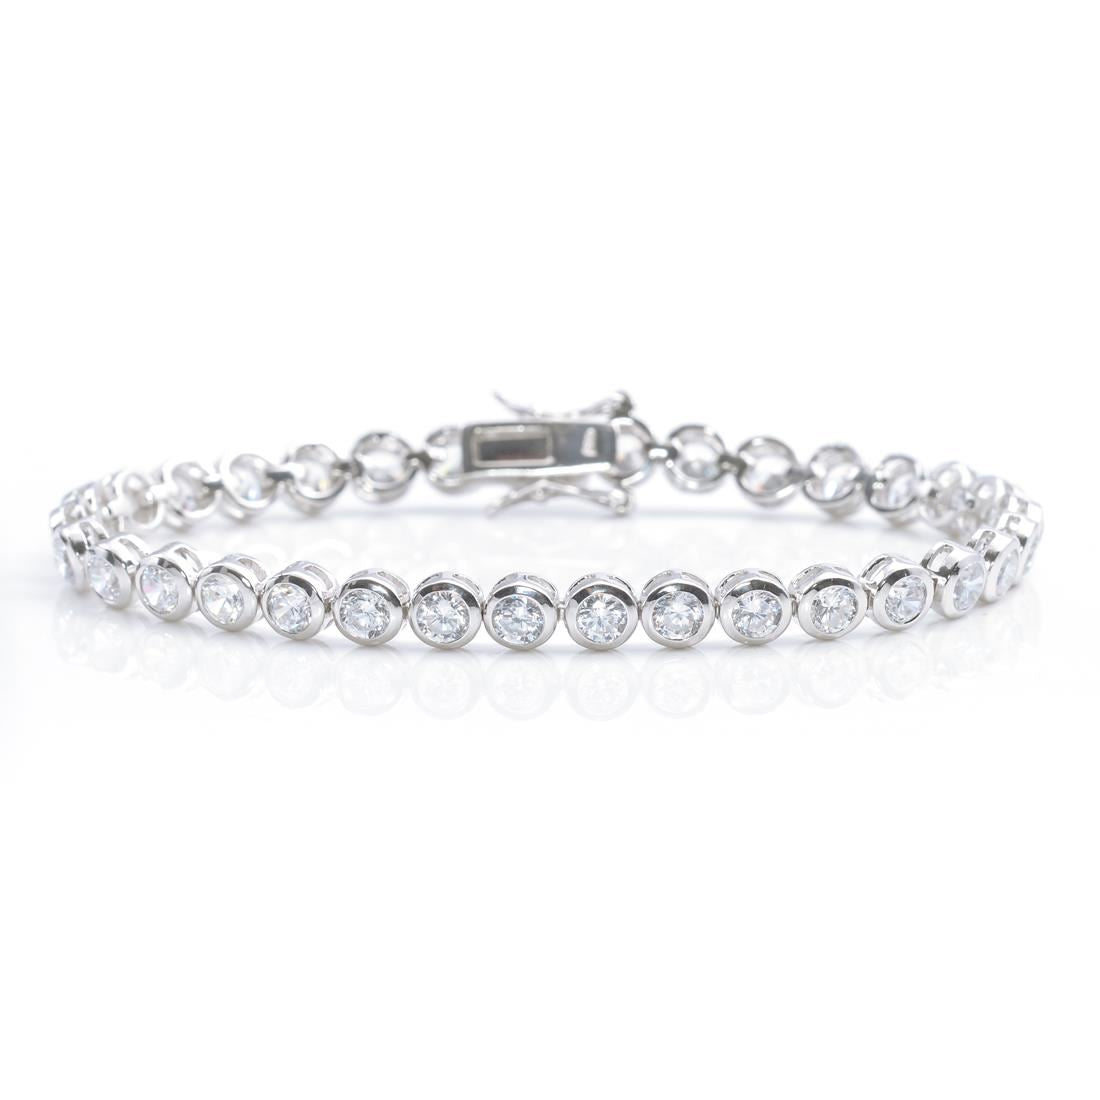 Sterling Silver 5 mm Round Cubic Zirconia Tennis Bracelet - Silverly